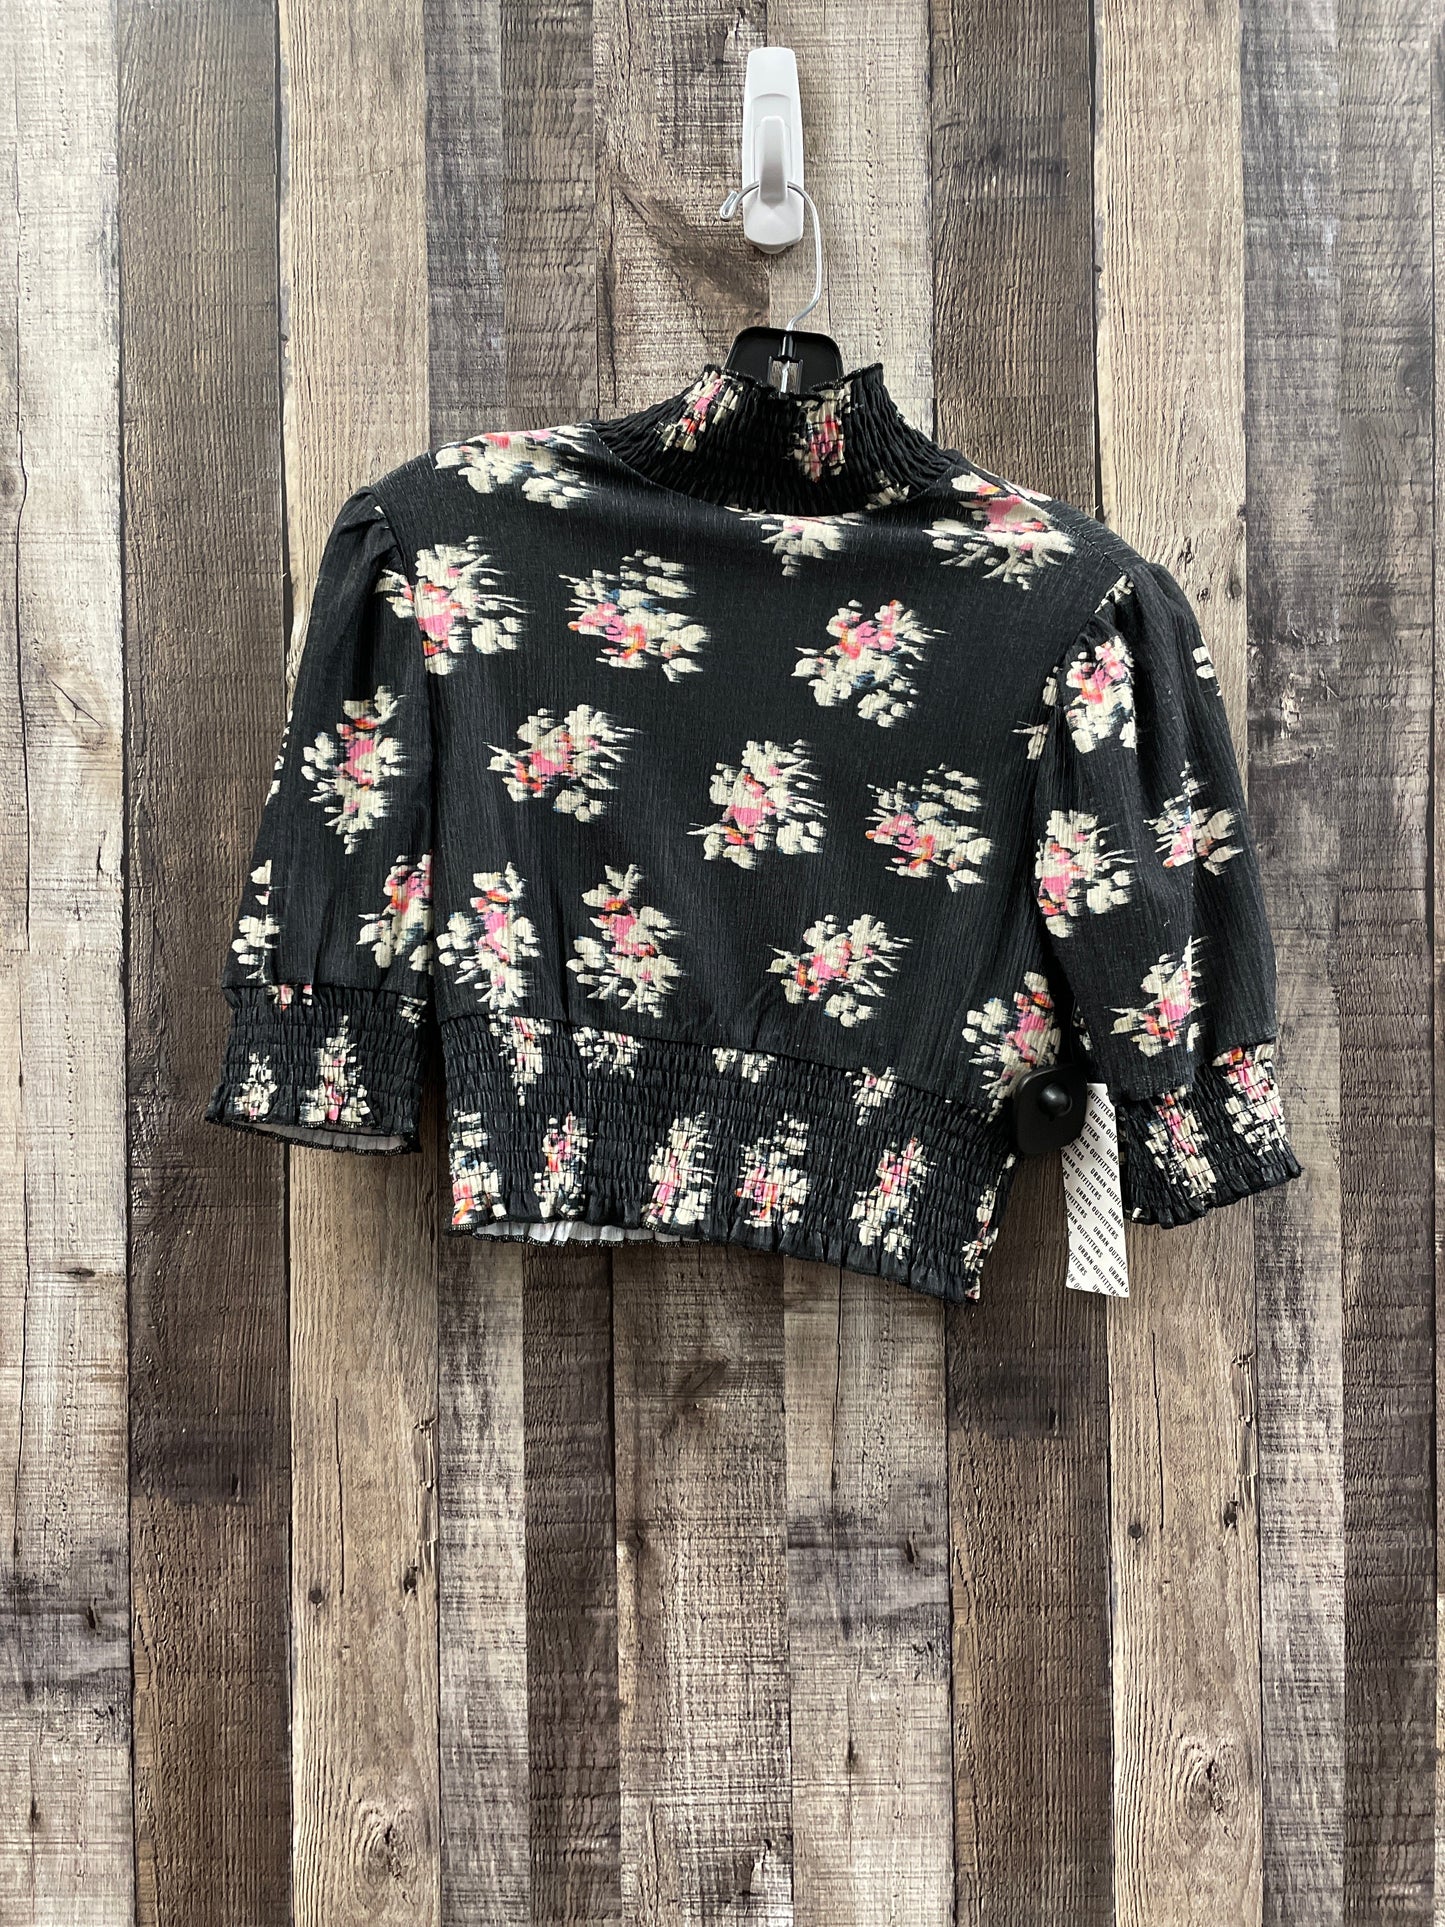 Floral Print Top Short Sleeve Urban Outfitters, Size S